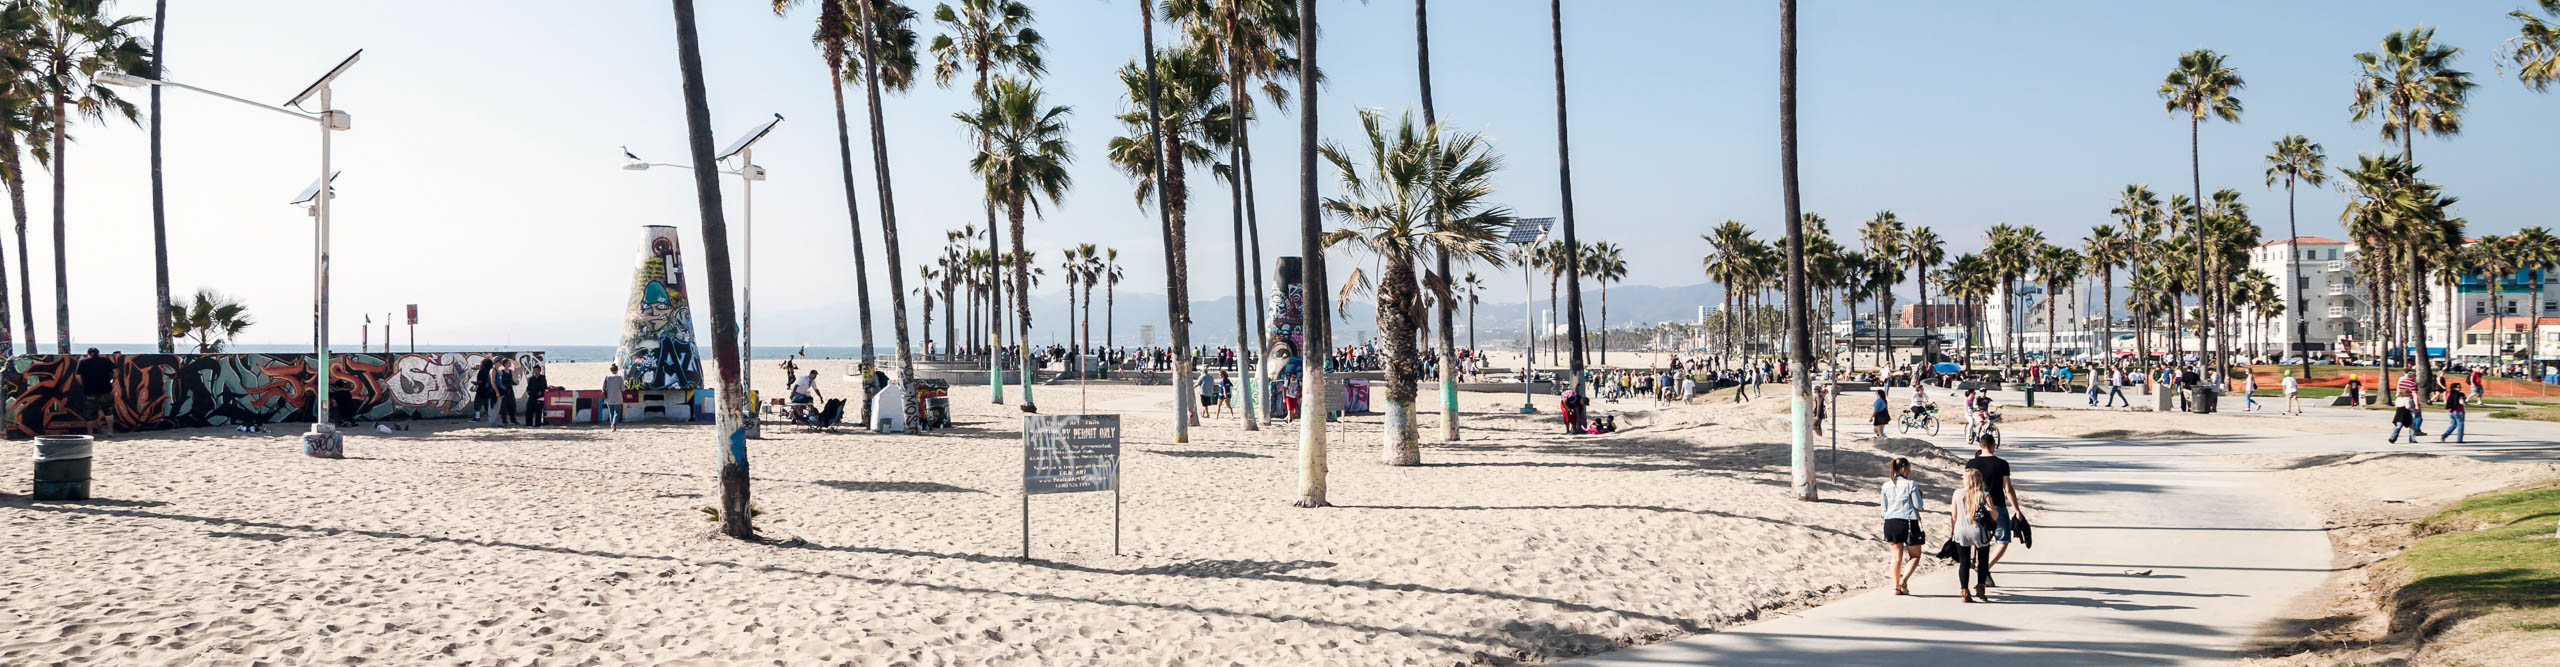 A street view of the palm-tree lined Venice Beach, USA